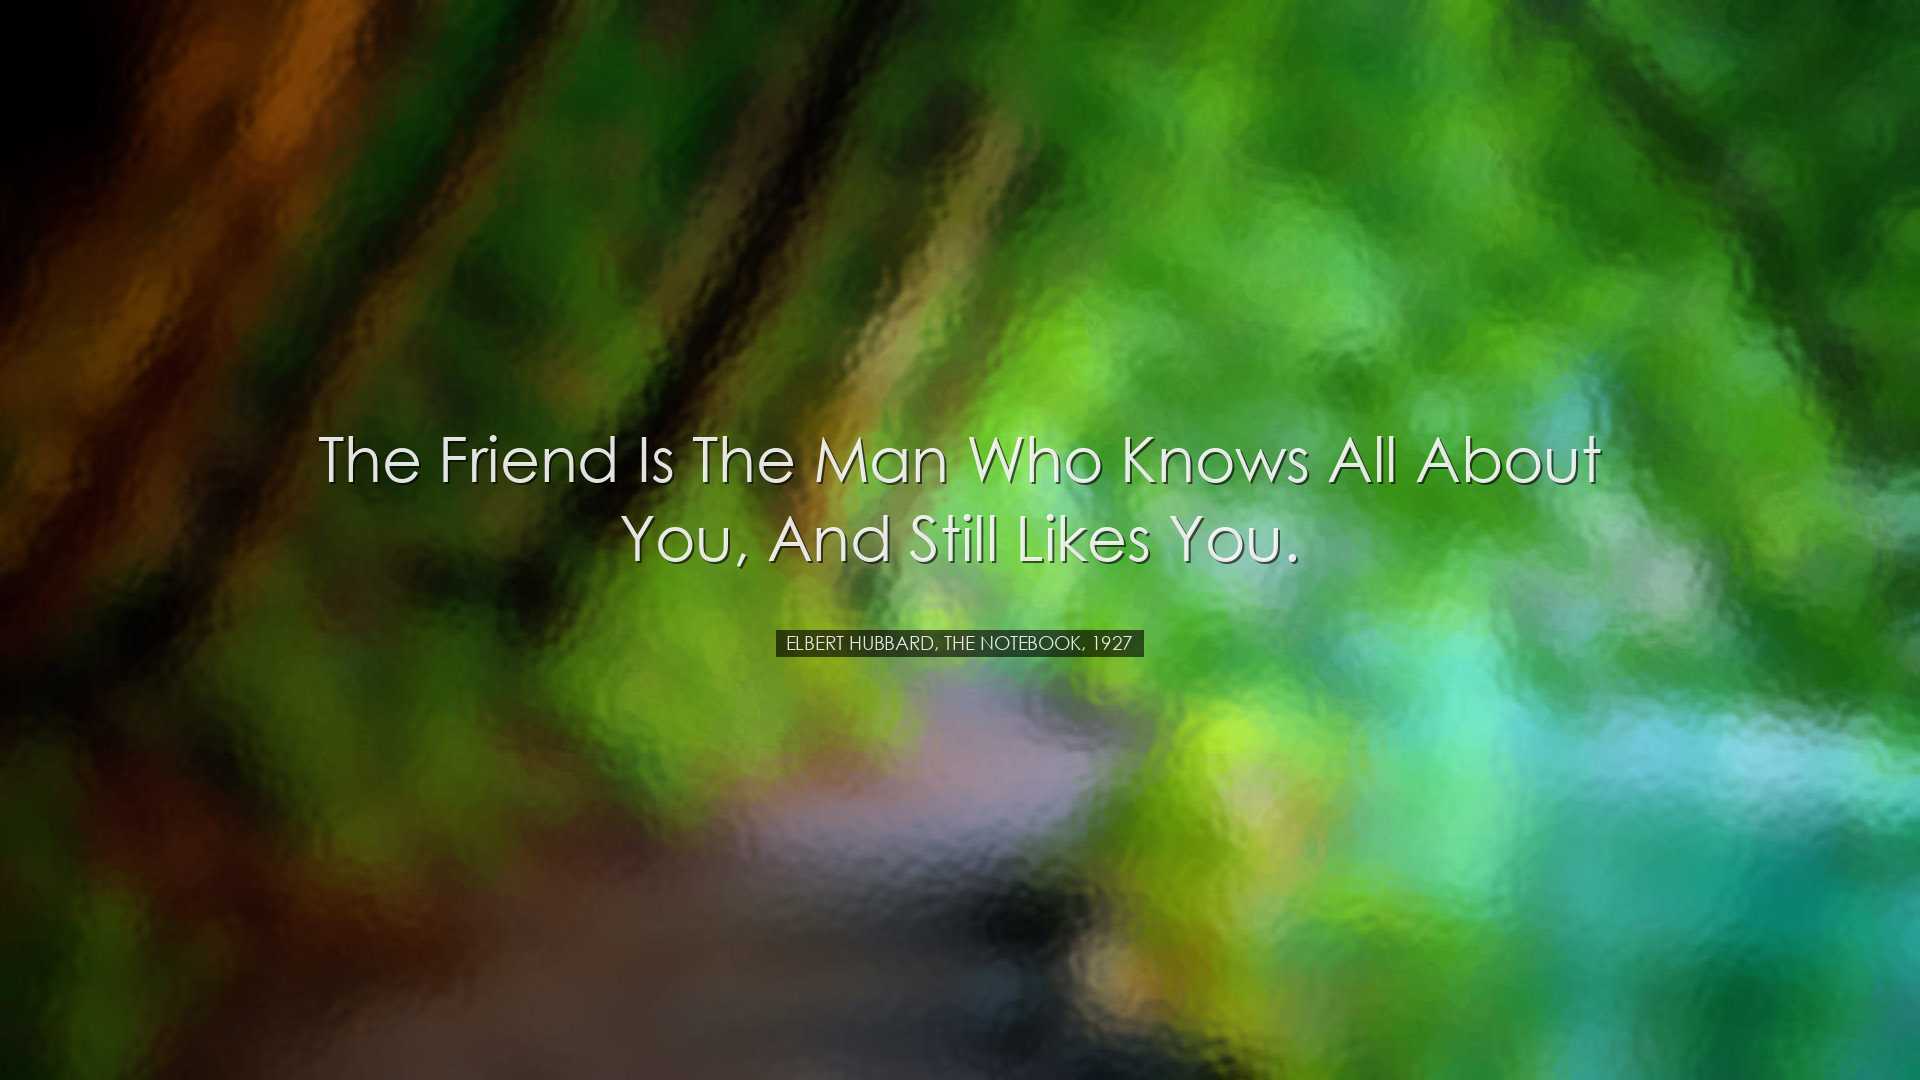 The friend is the man who knows all about you, and still likes you